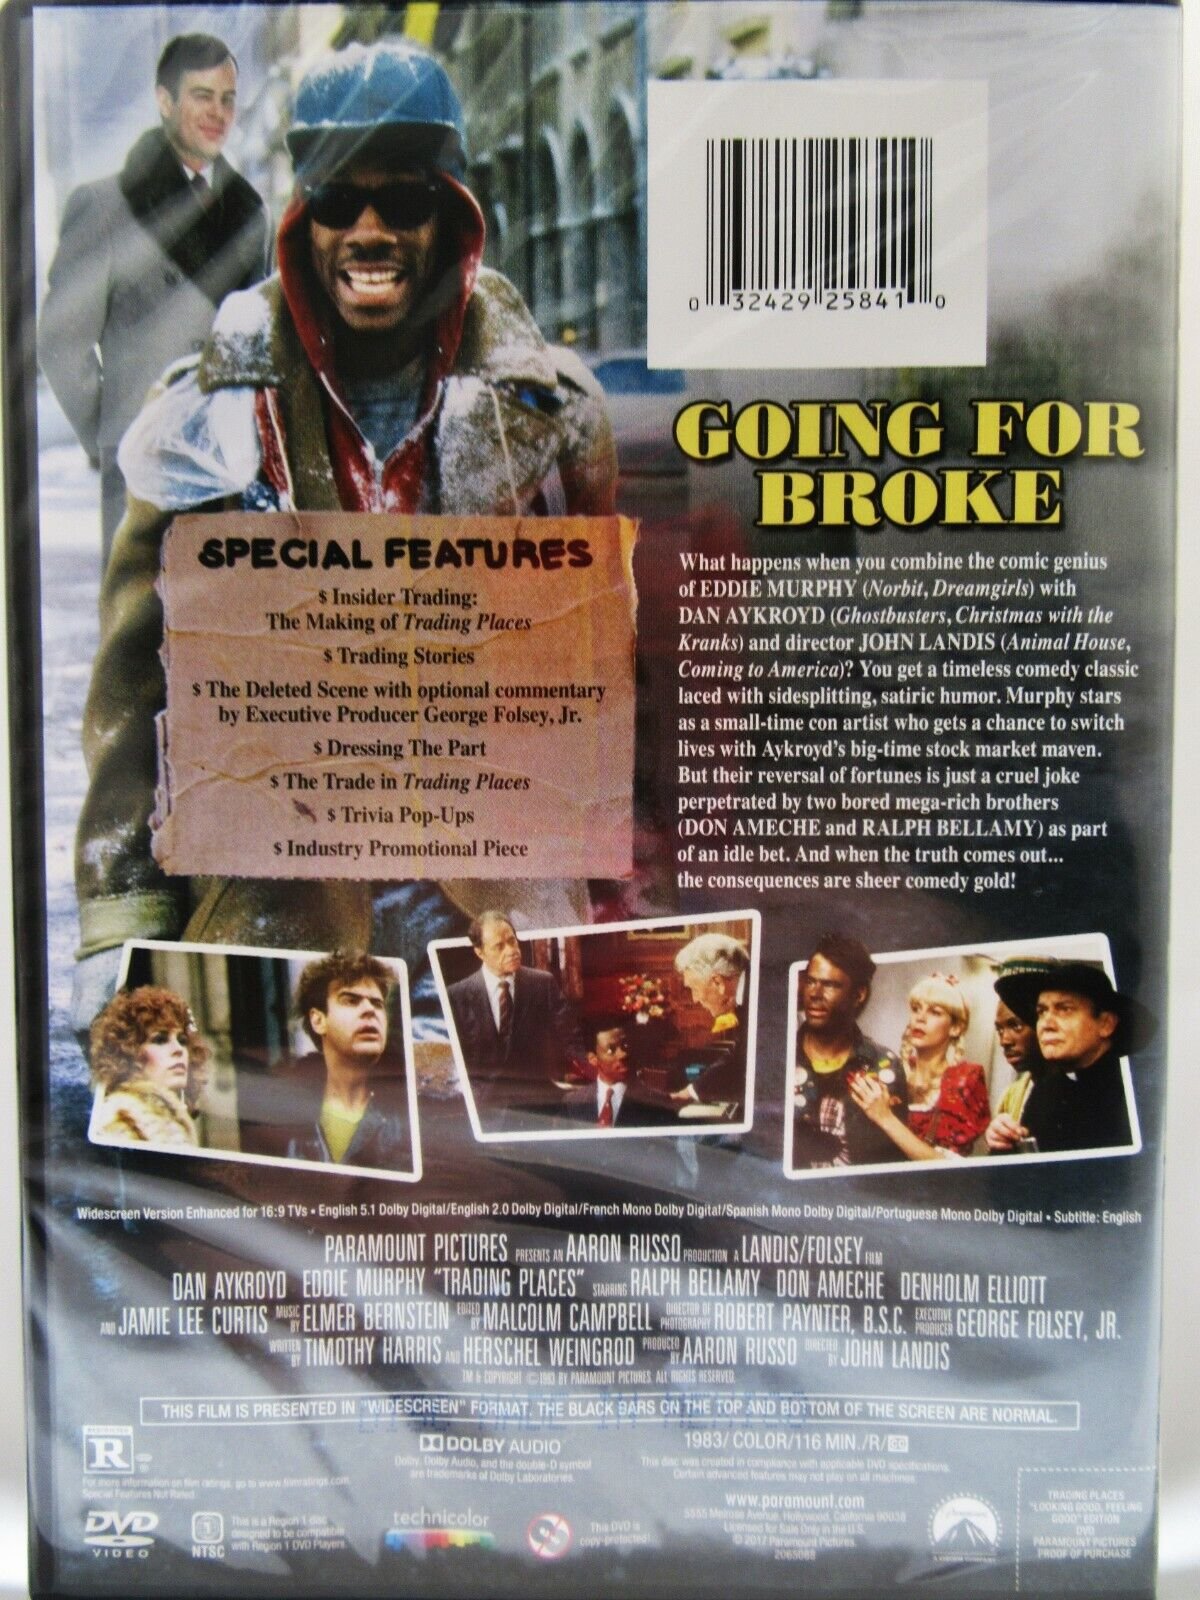 Trading Places (DVD), Paramount, Comedy - image 3 of 4